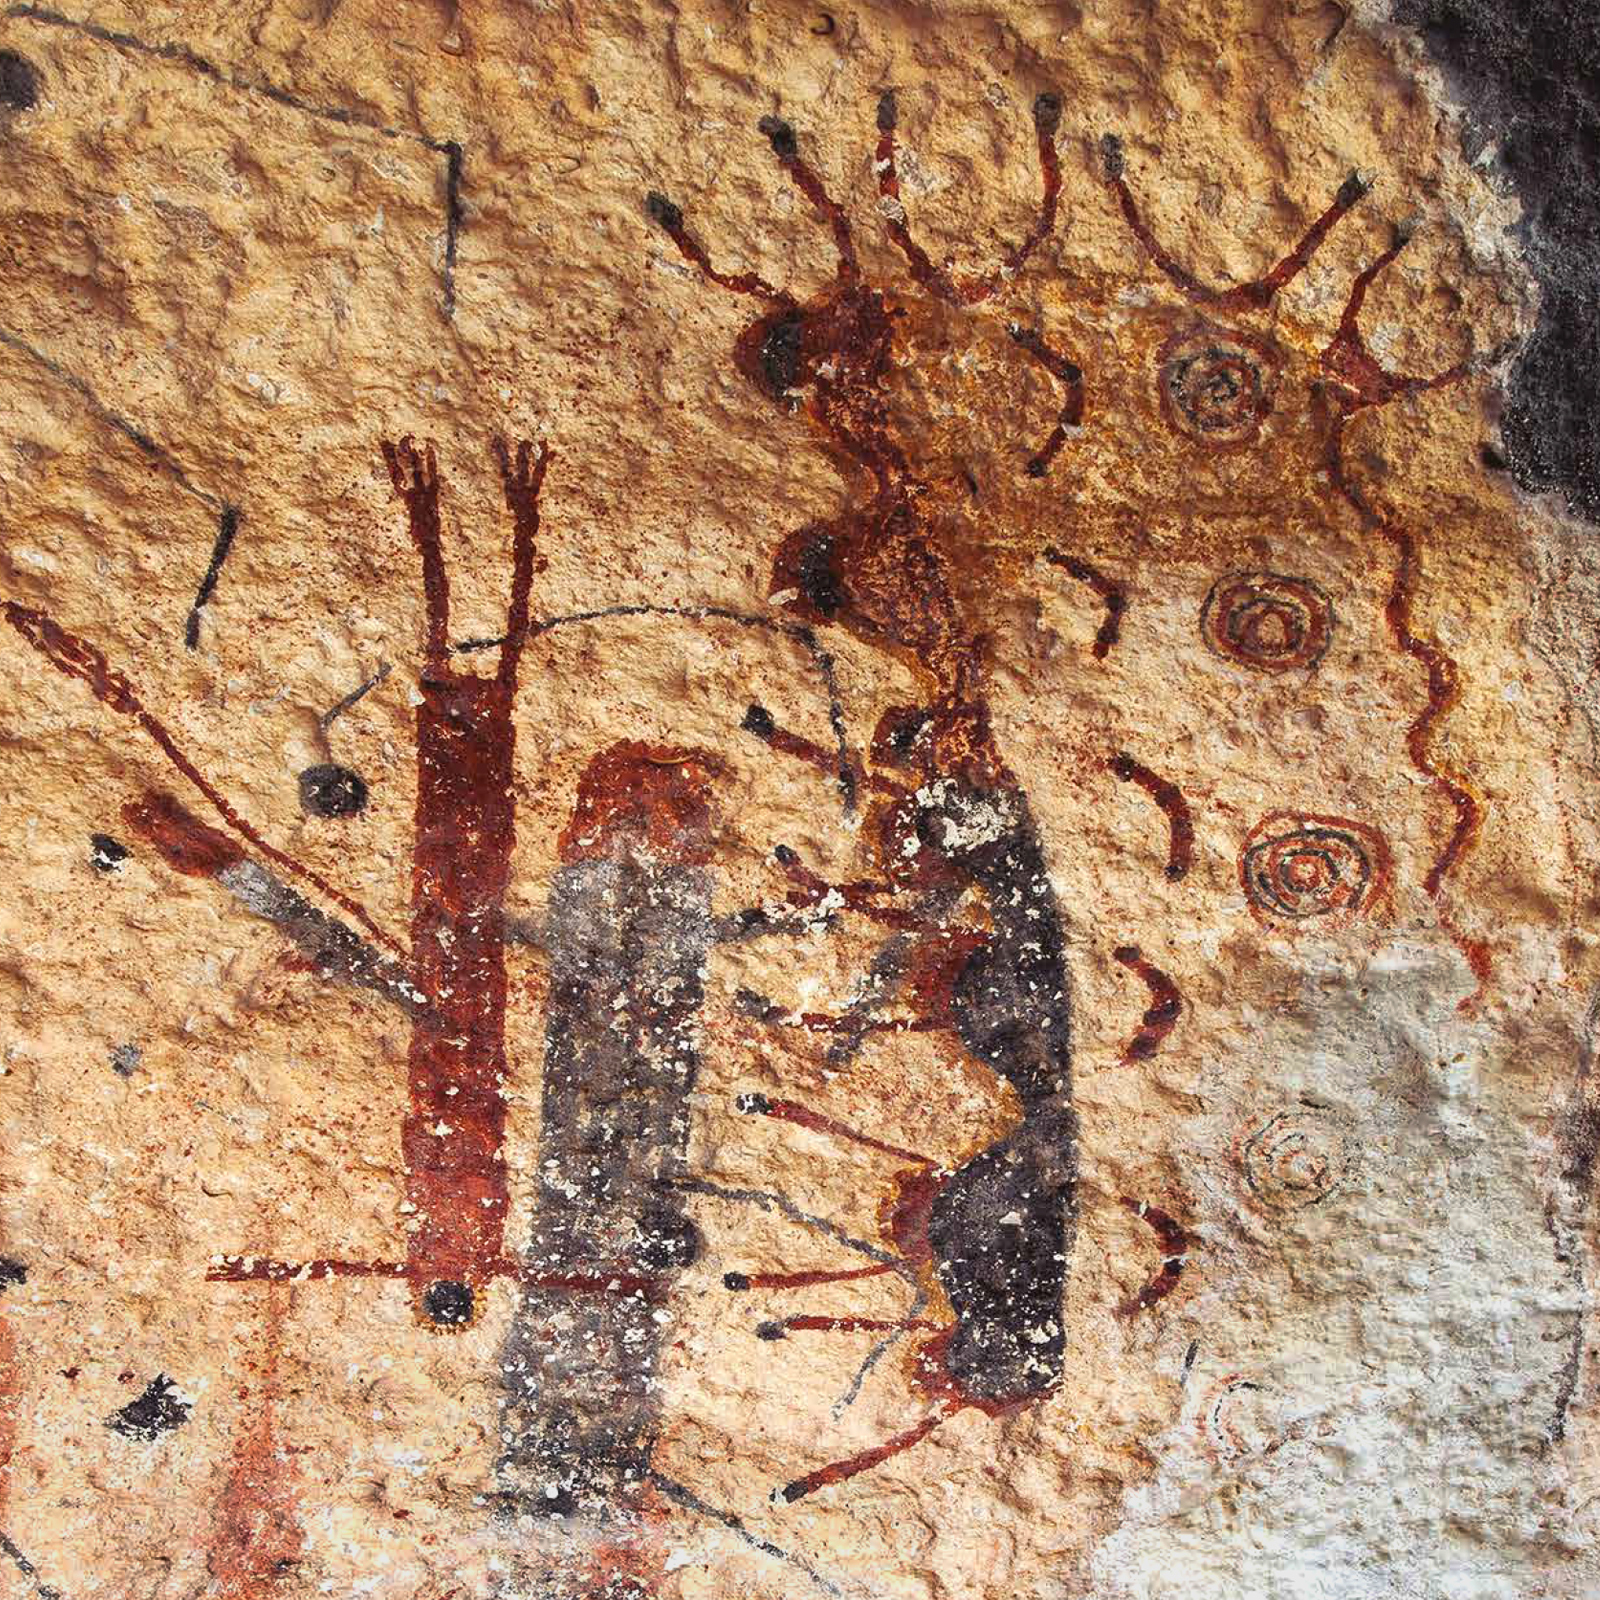 Sometimes artists painted upside down figures. In the story told through the White Shaman Mural, this black-masked anthropomorph is the Evening Star descending into the underworld at sunset